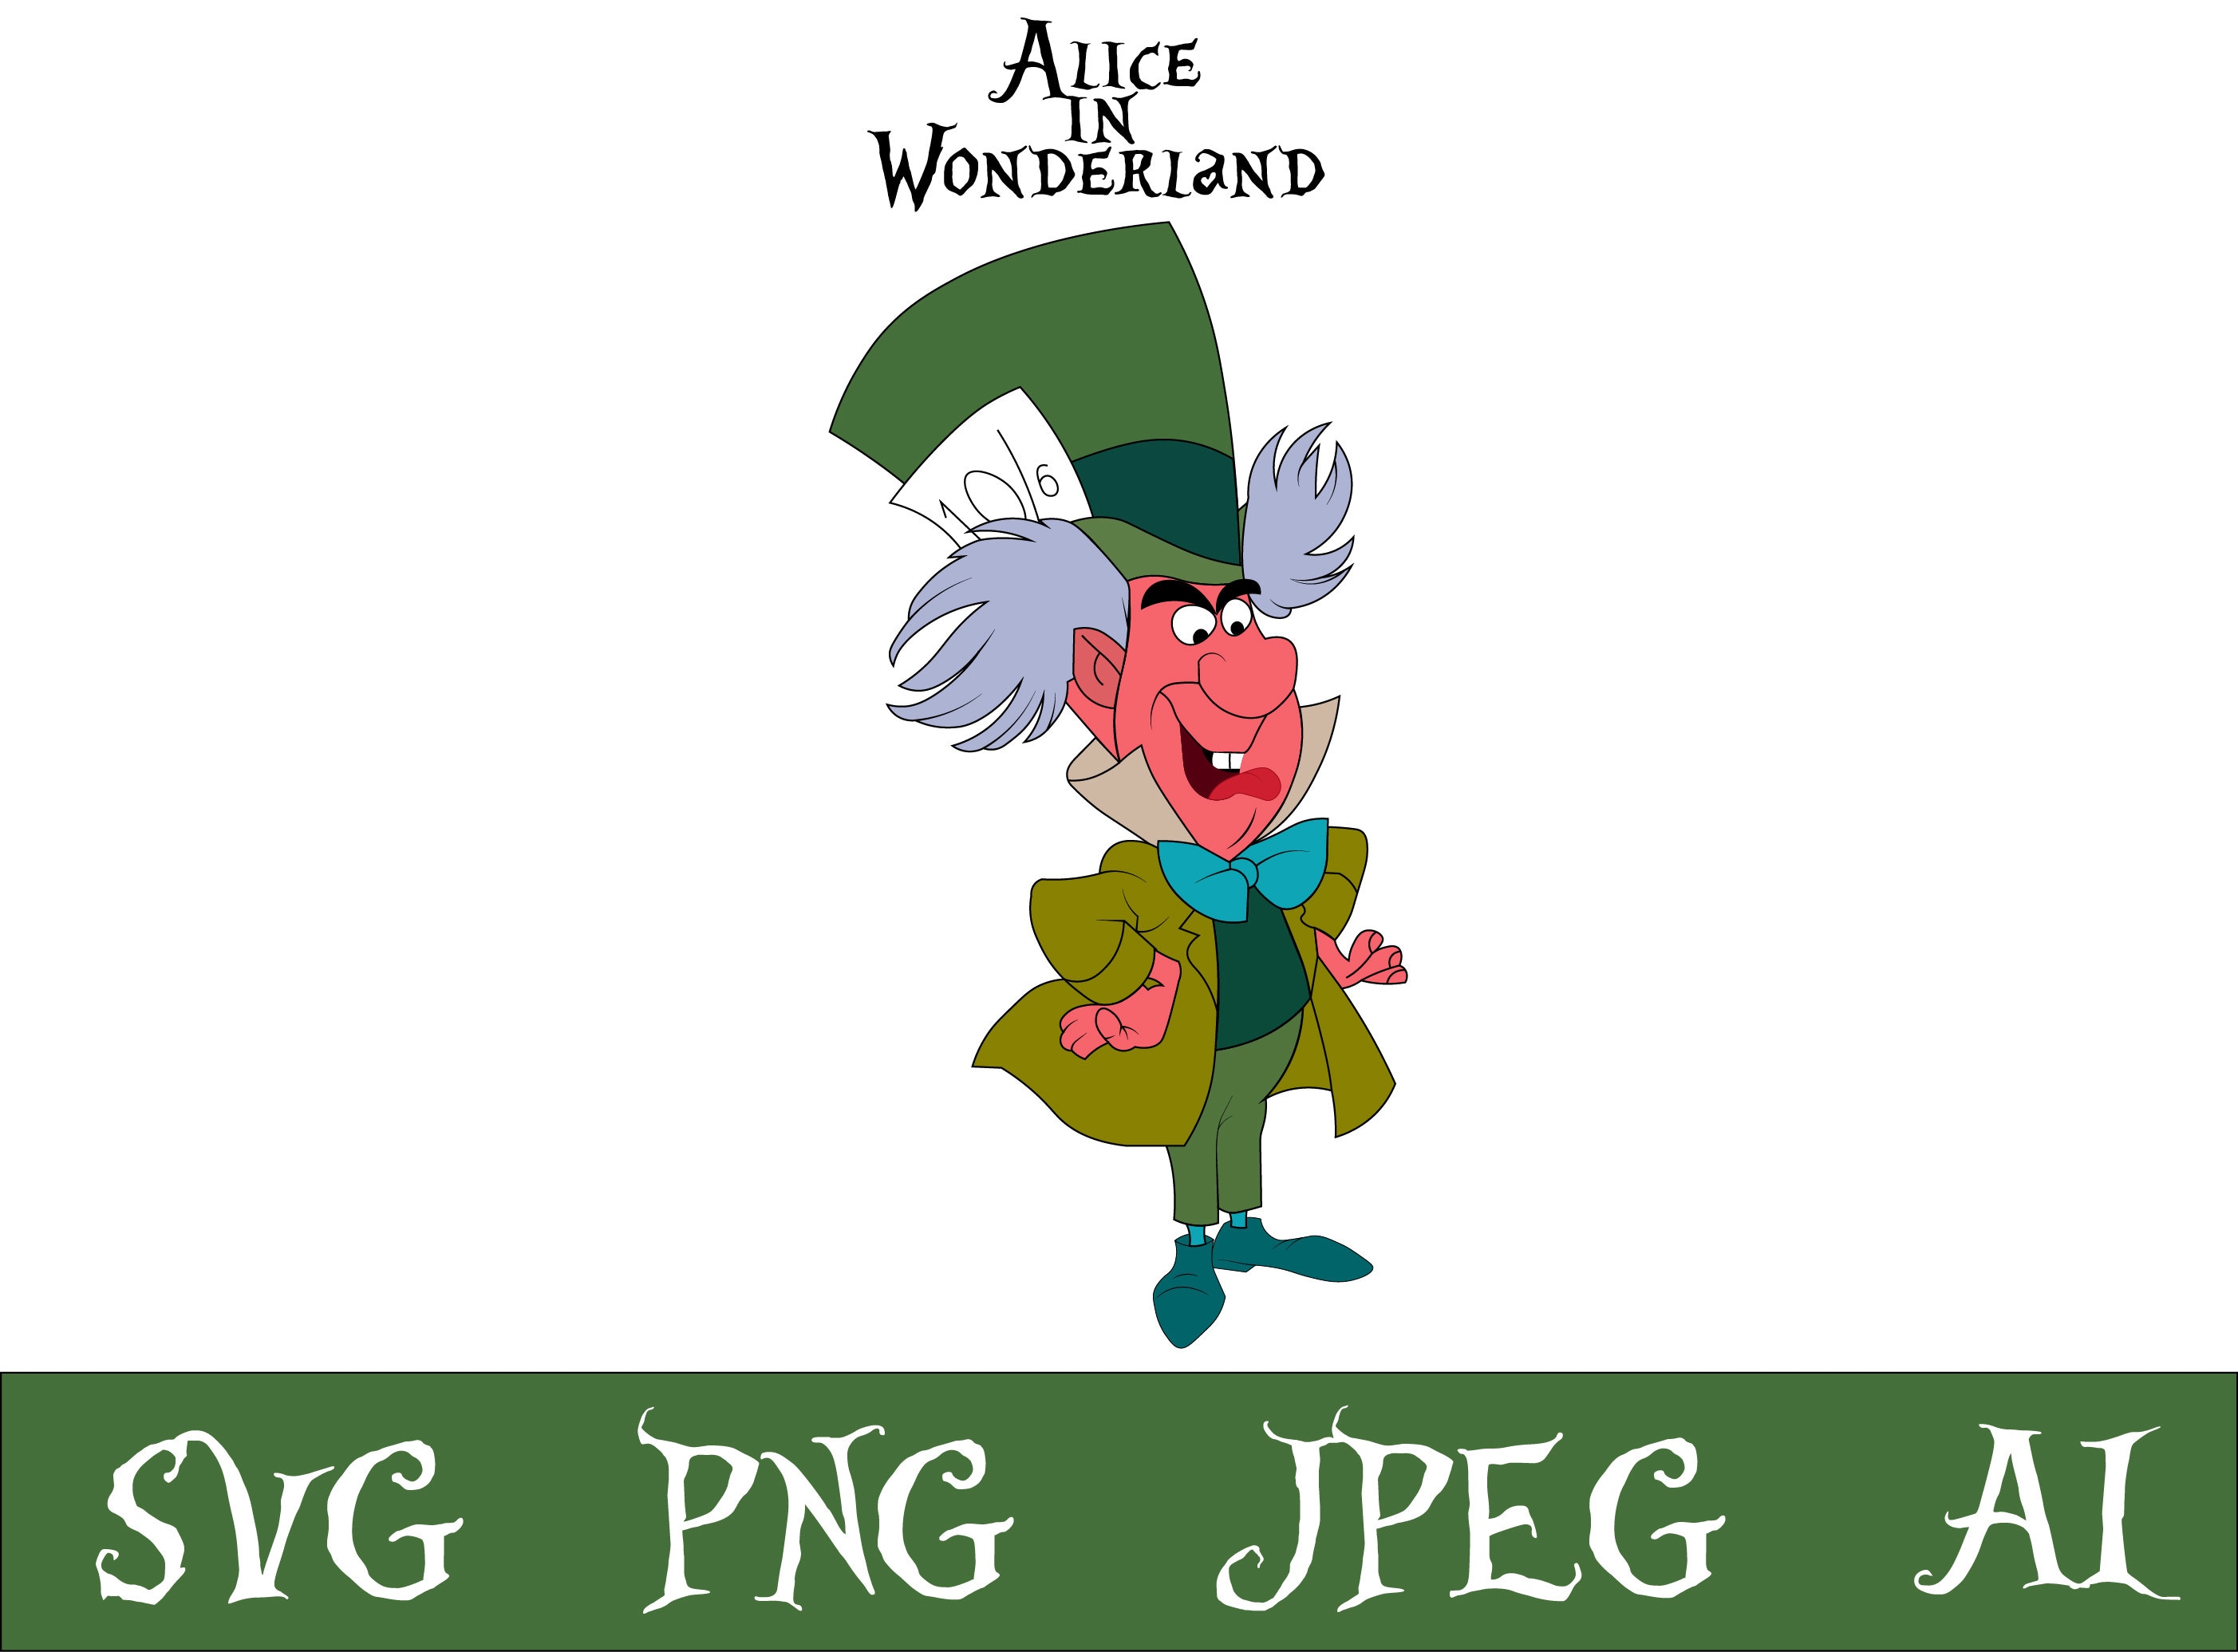 Alice in Wonderland Clipart, Mad Hatter Tea Party – MUJKA CLIPARTS